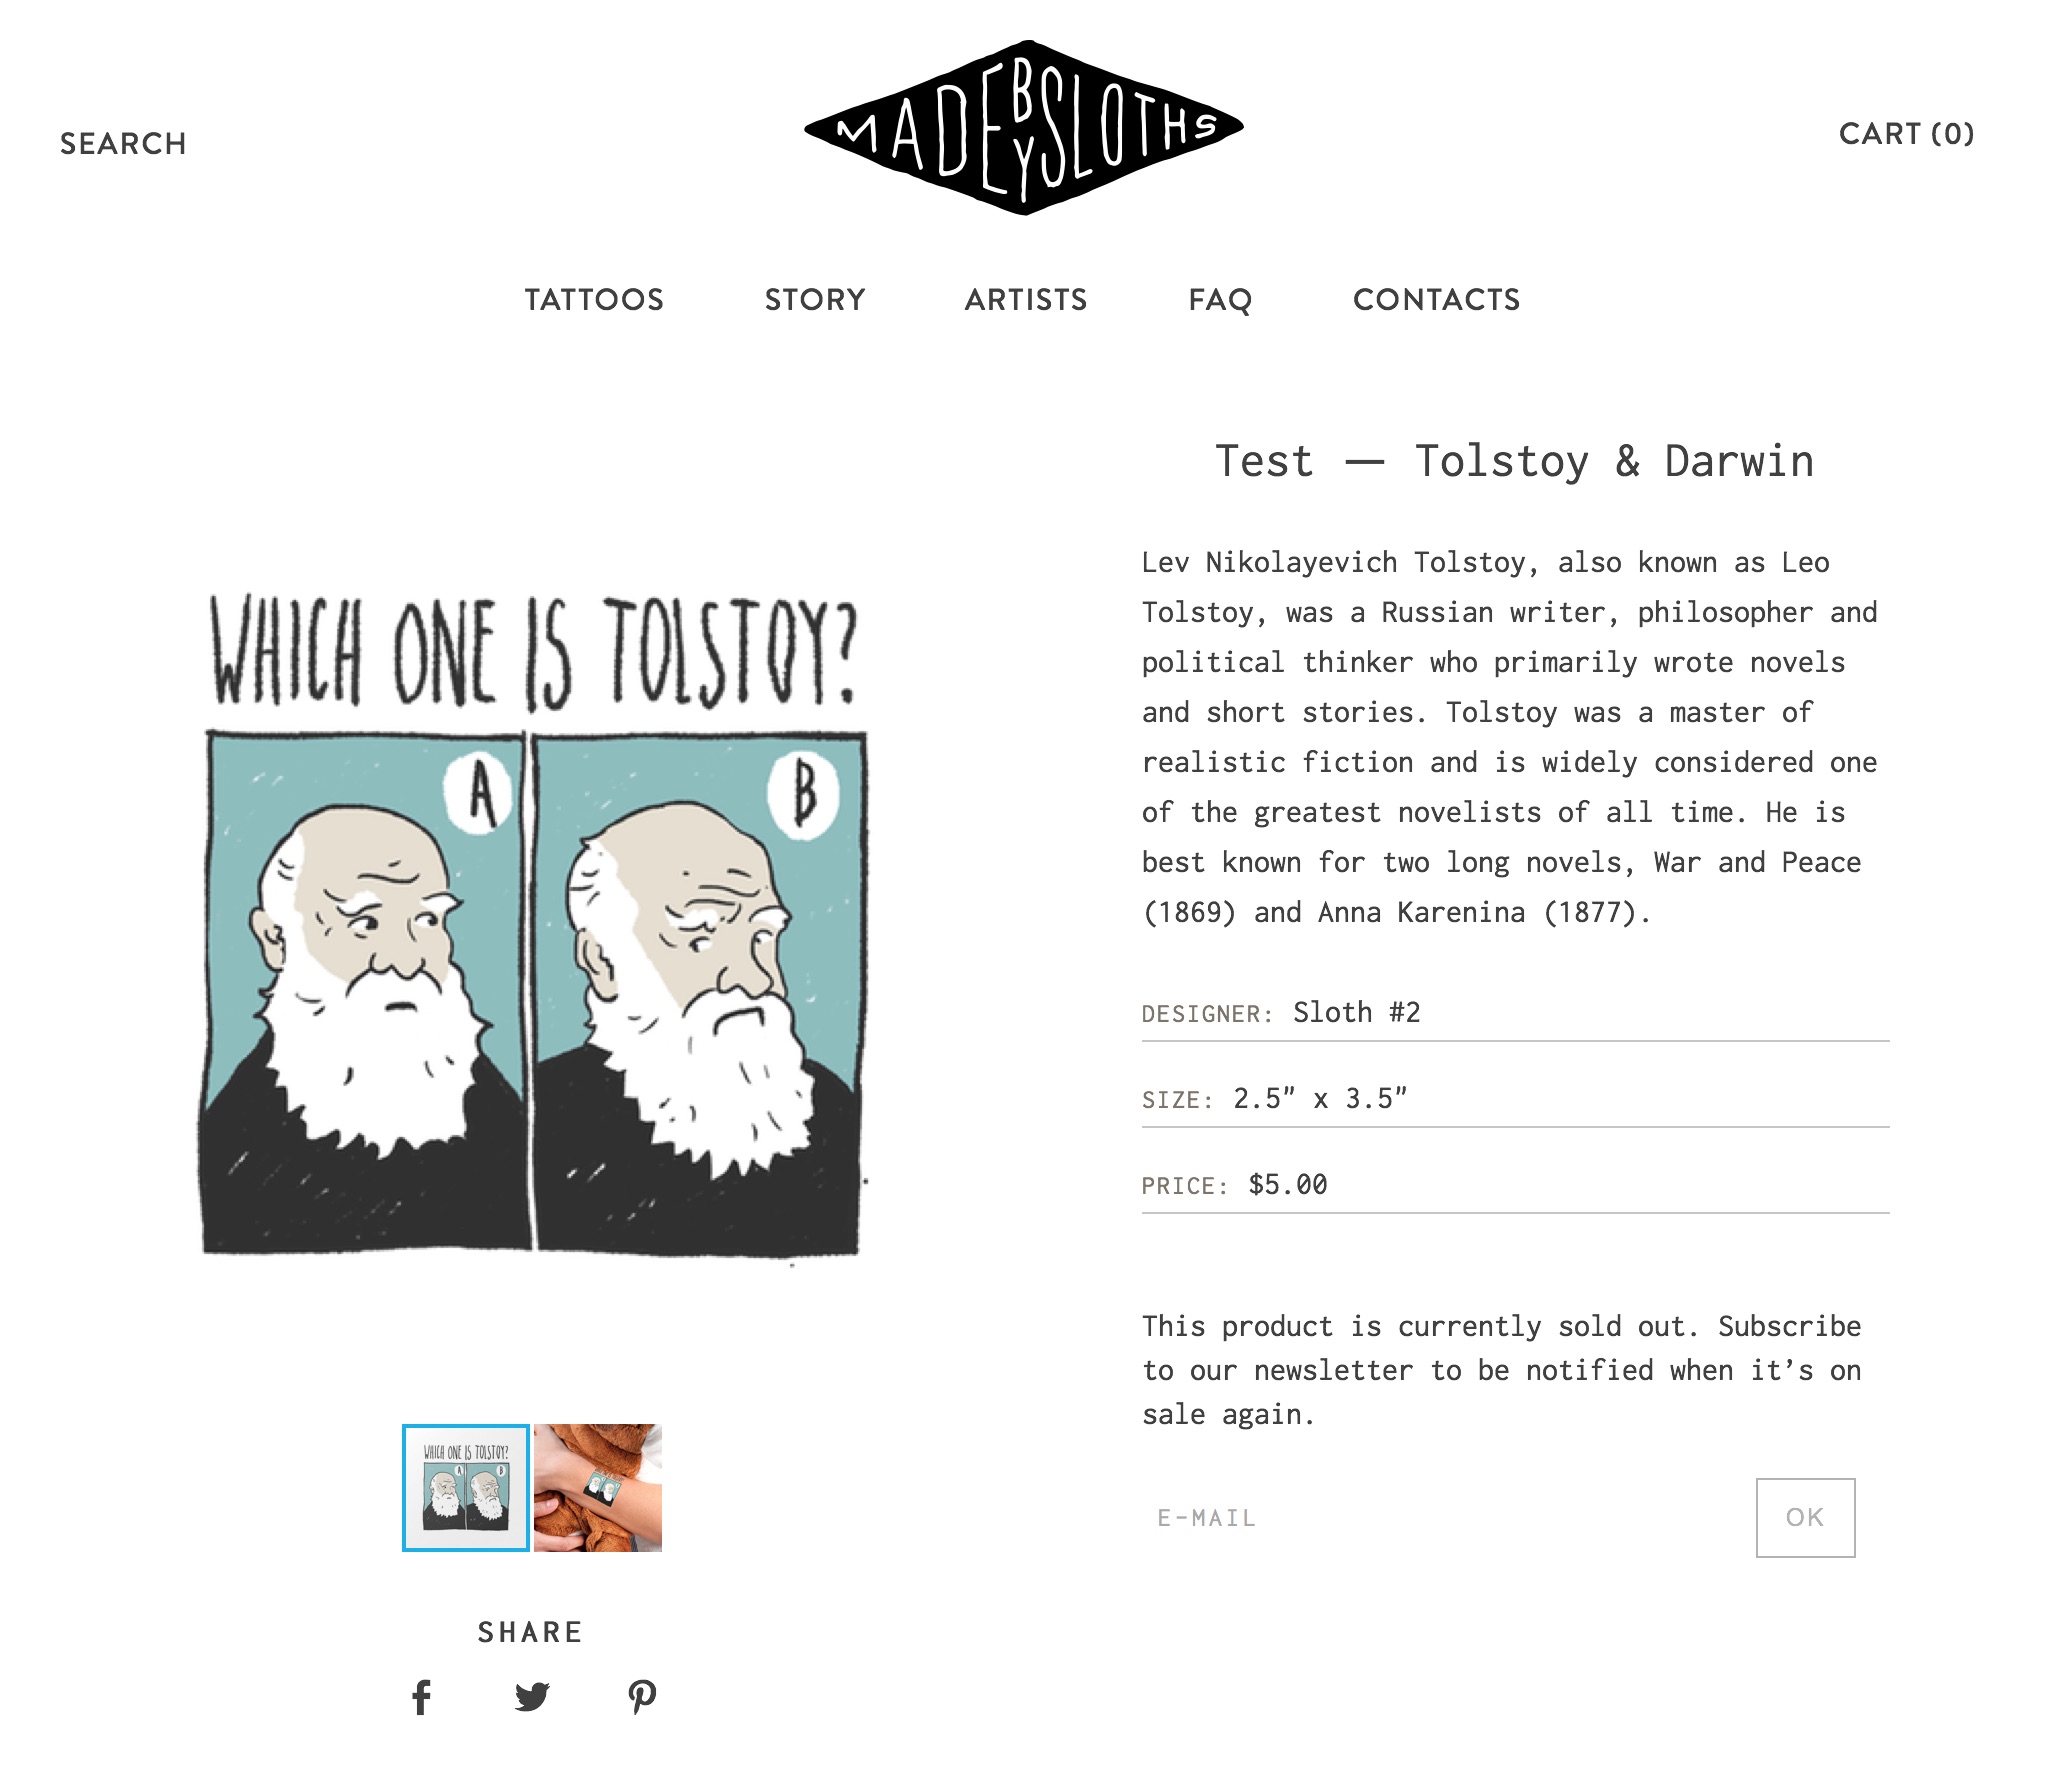 Made by Sloths product page, an illustration “Which one is Tolstoy” featuring drawn portraits of Tolstoy and Darwin